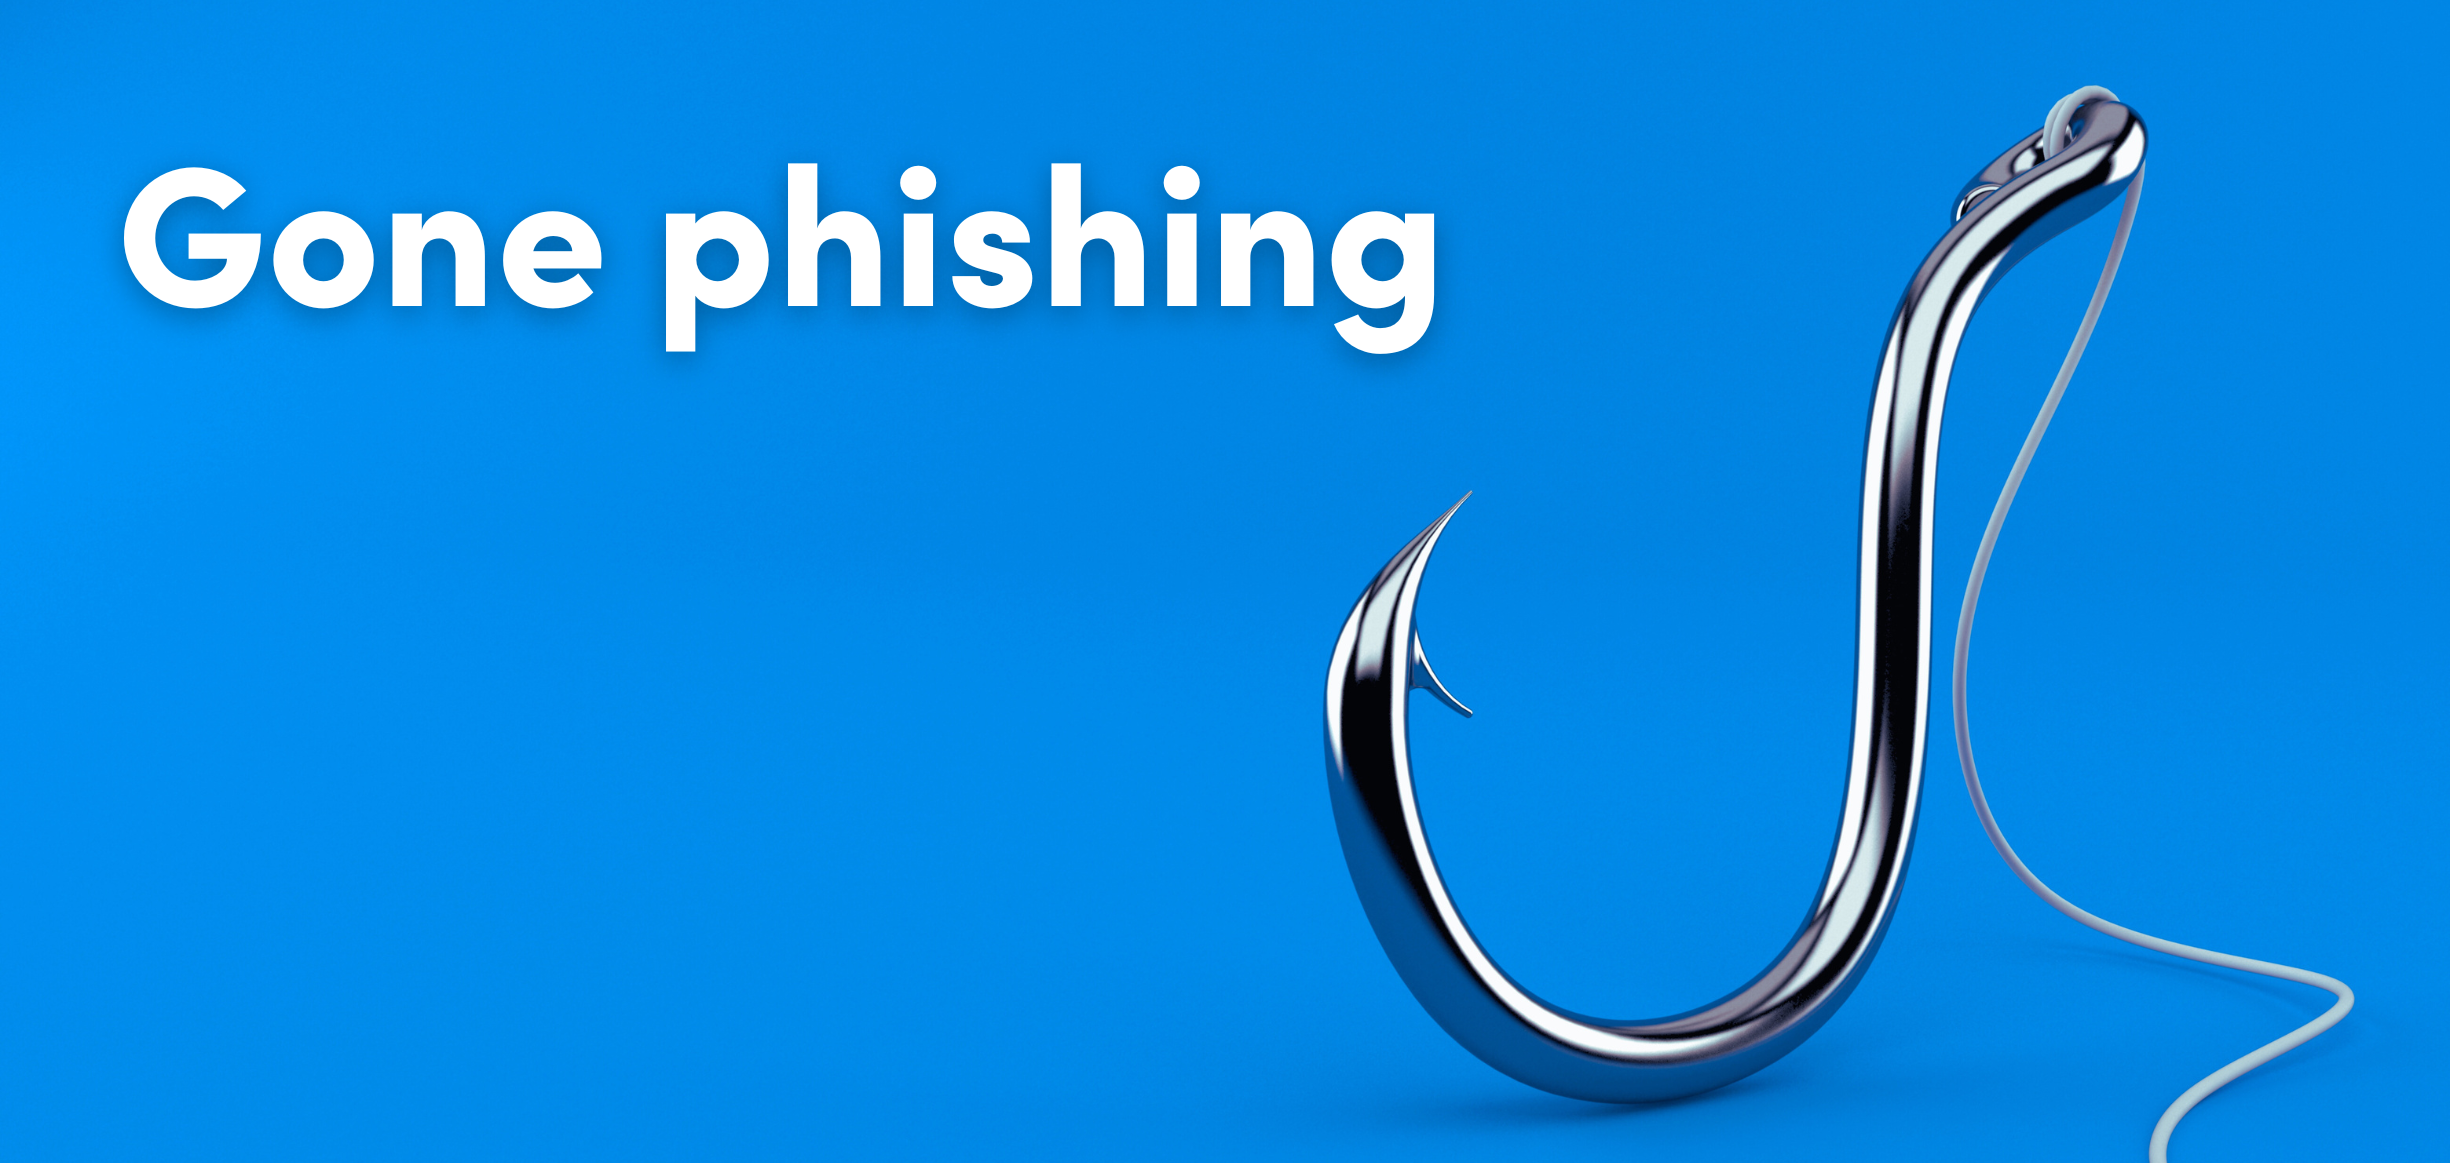 Ethereum founder hacked in phishing attack